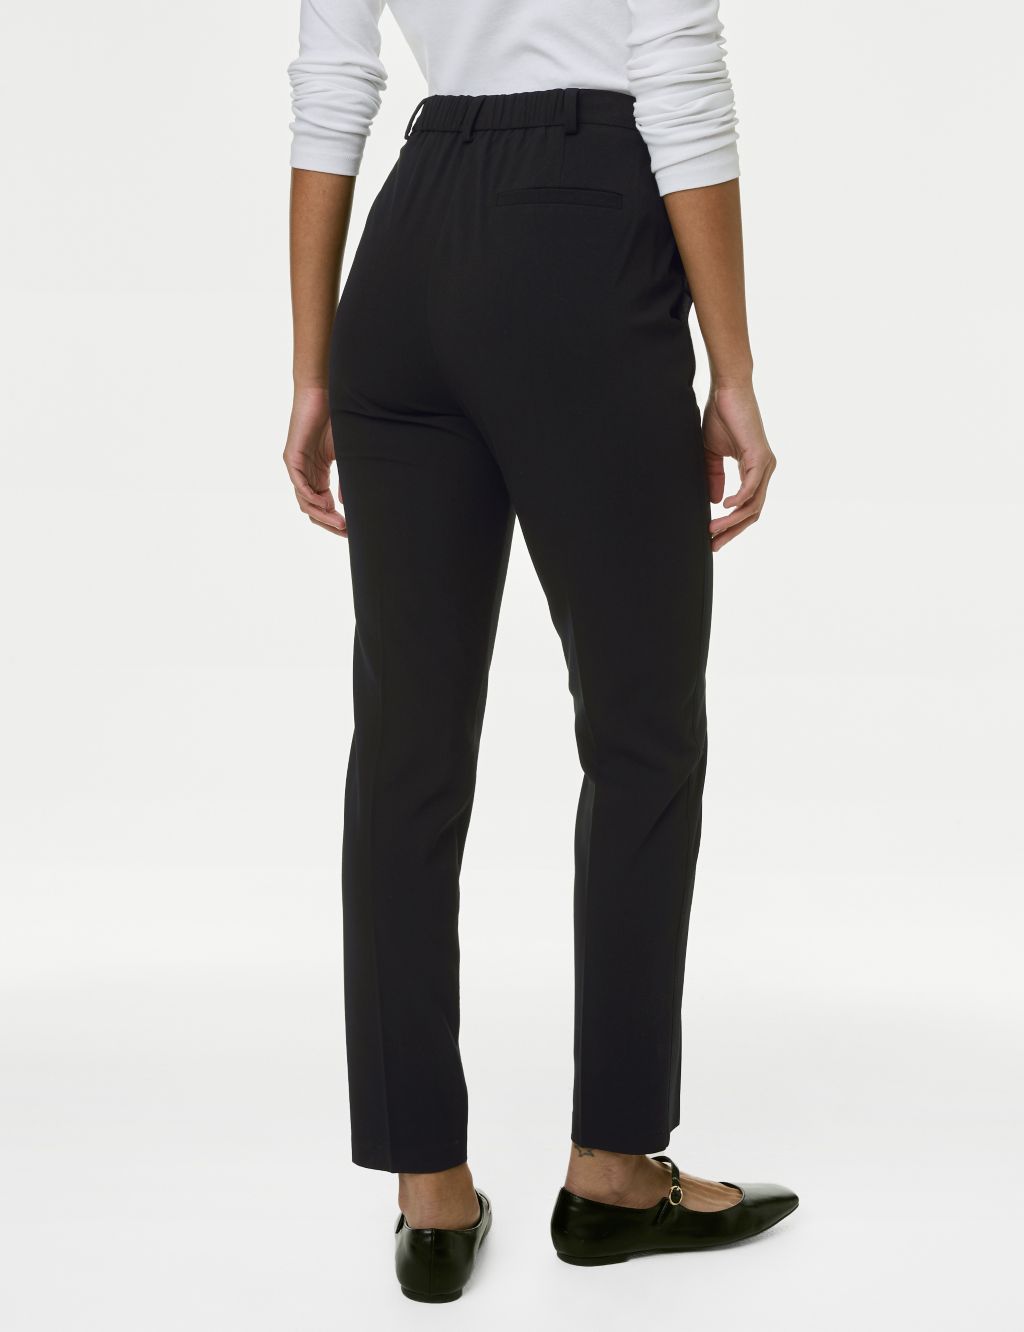 Slim Fit Ankle Grazer Trousers with Stretch 4 of 8